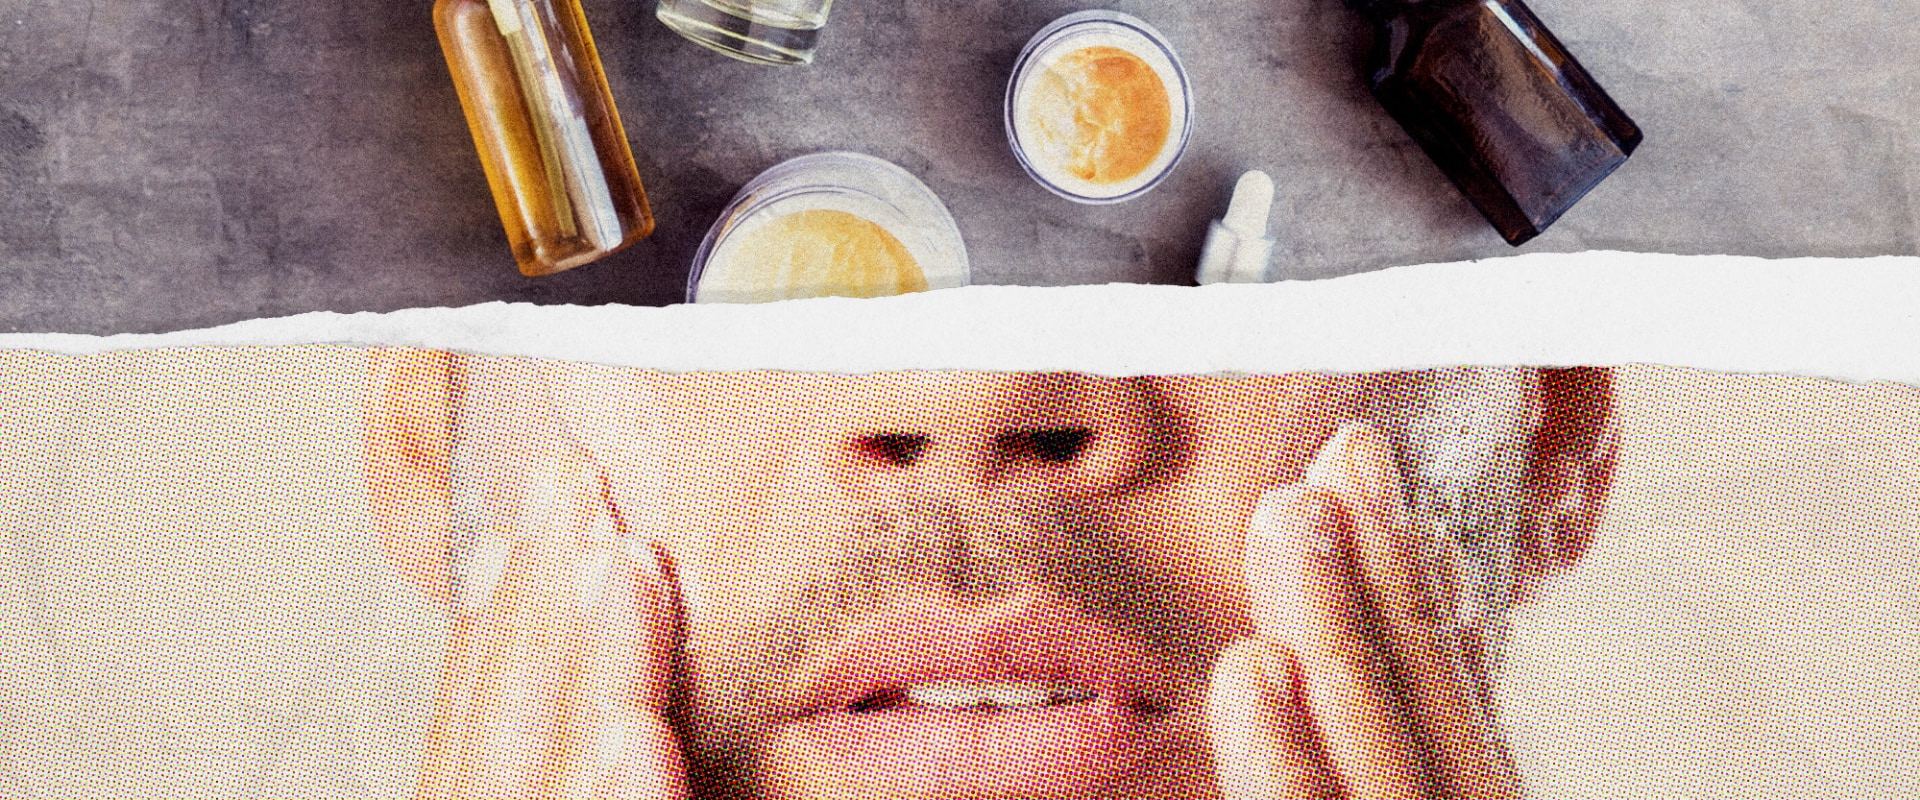 The Tell-Tale Signs You Need to Change Your Men's Skincare Routine